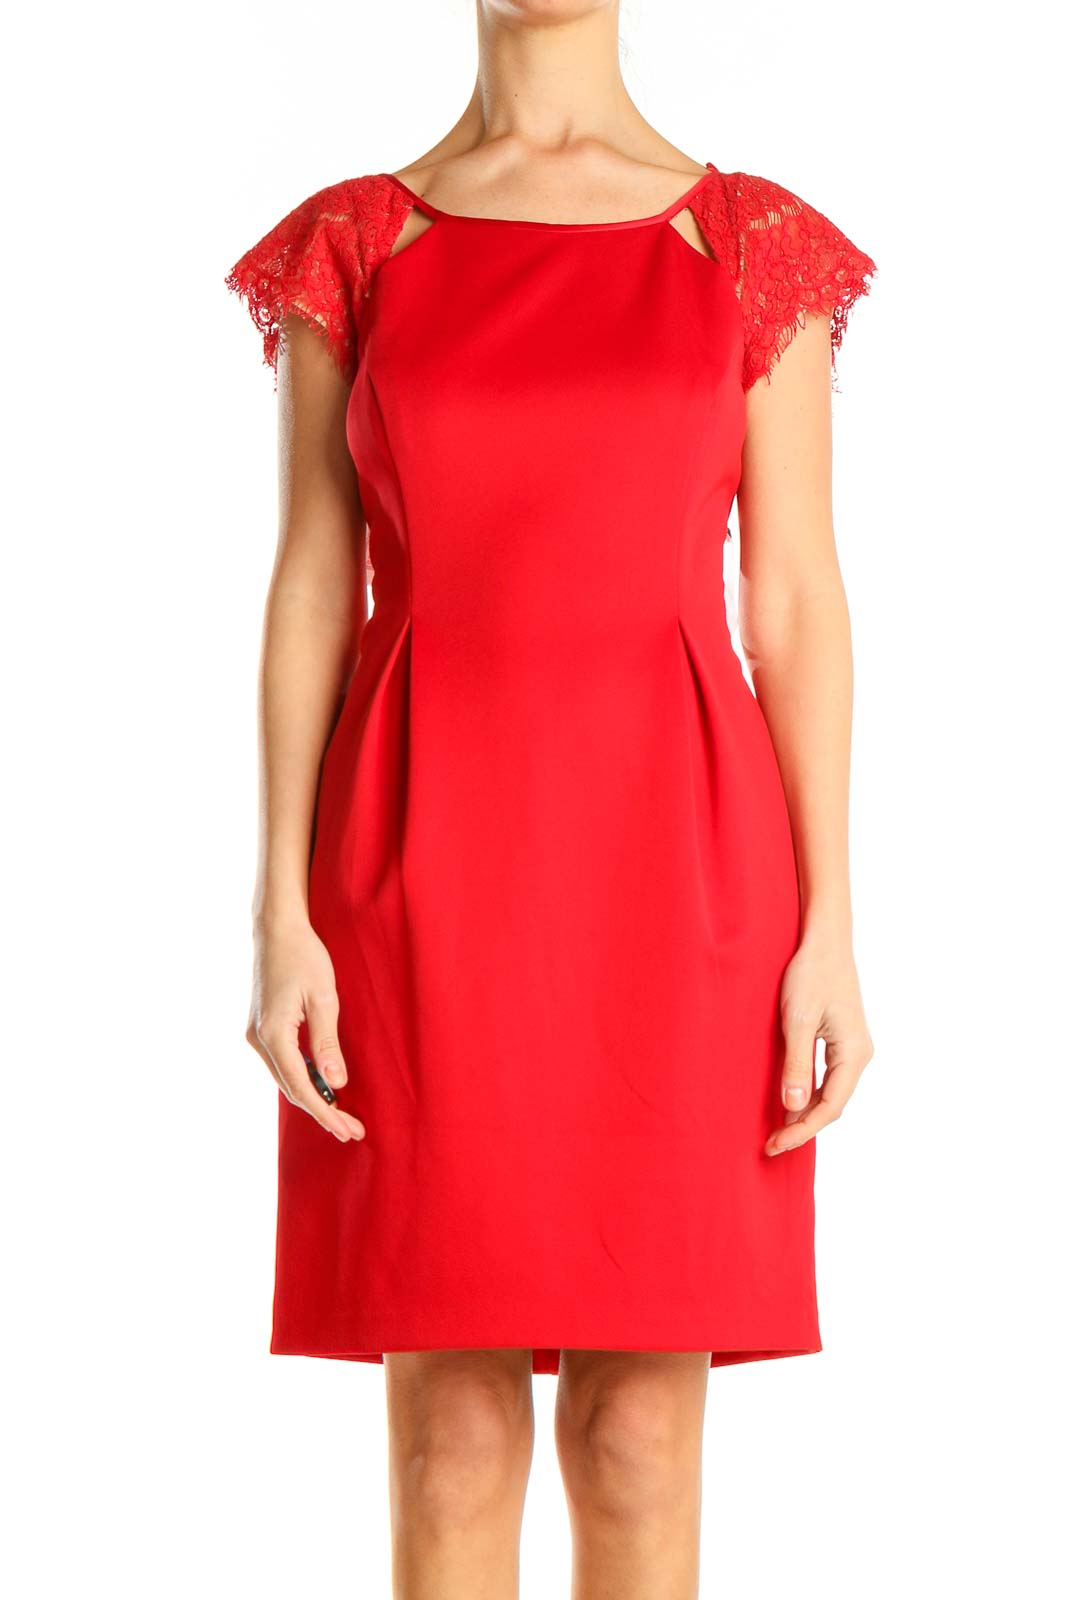 - Red Classic Lace Sleeve Dress Cotton Rayon | SilkRoll